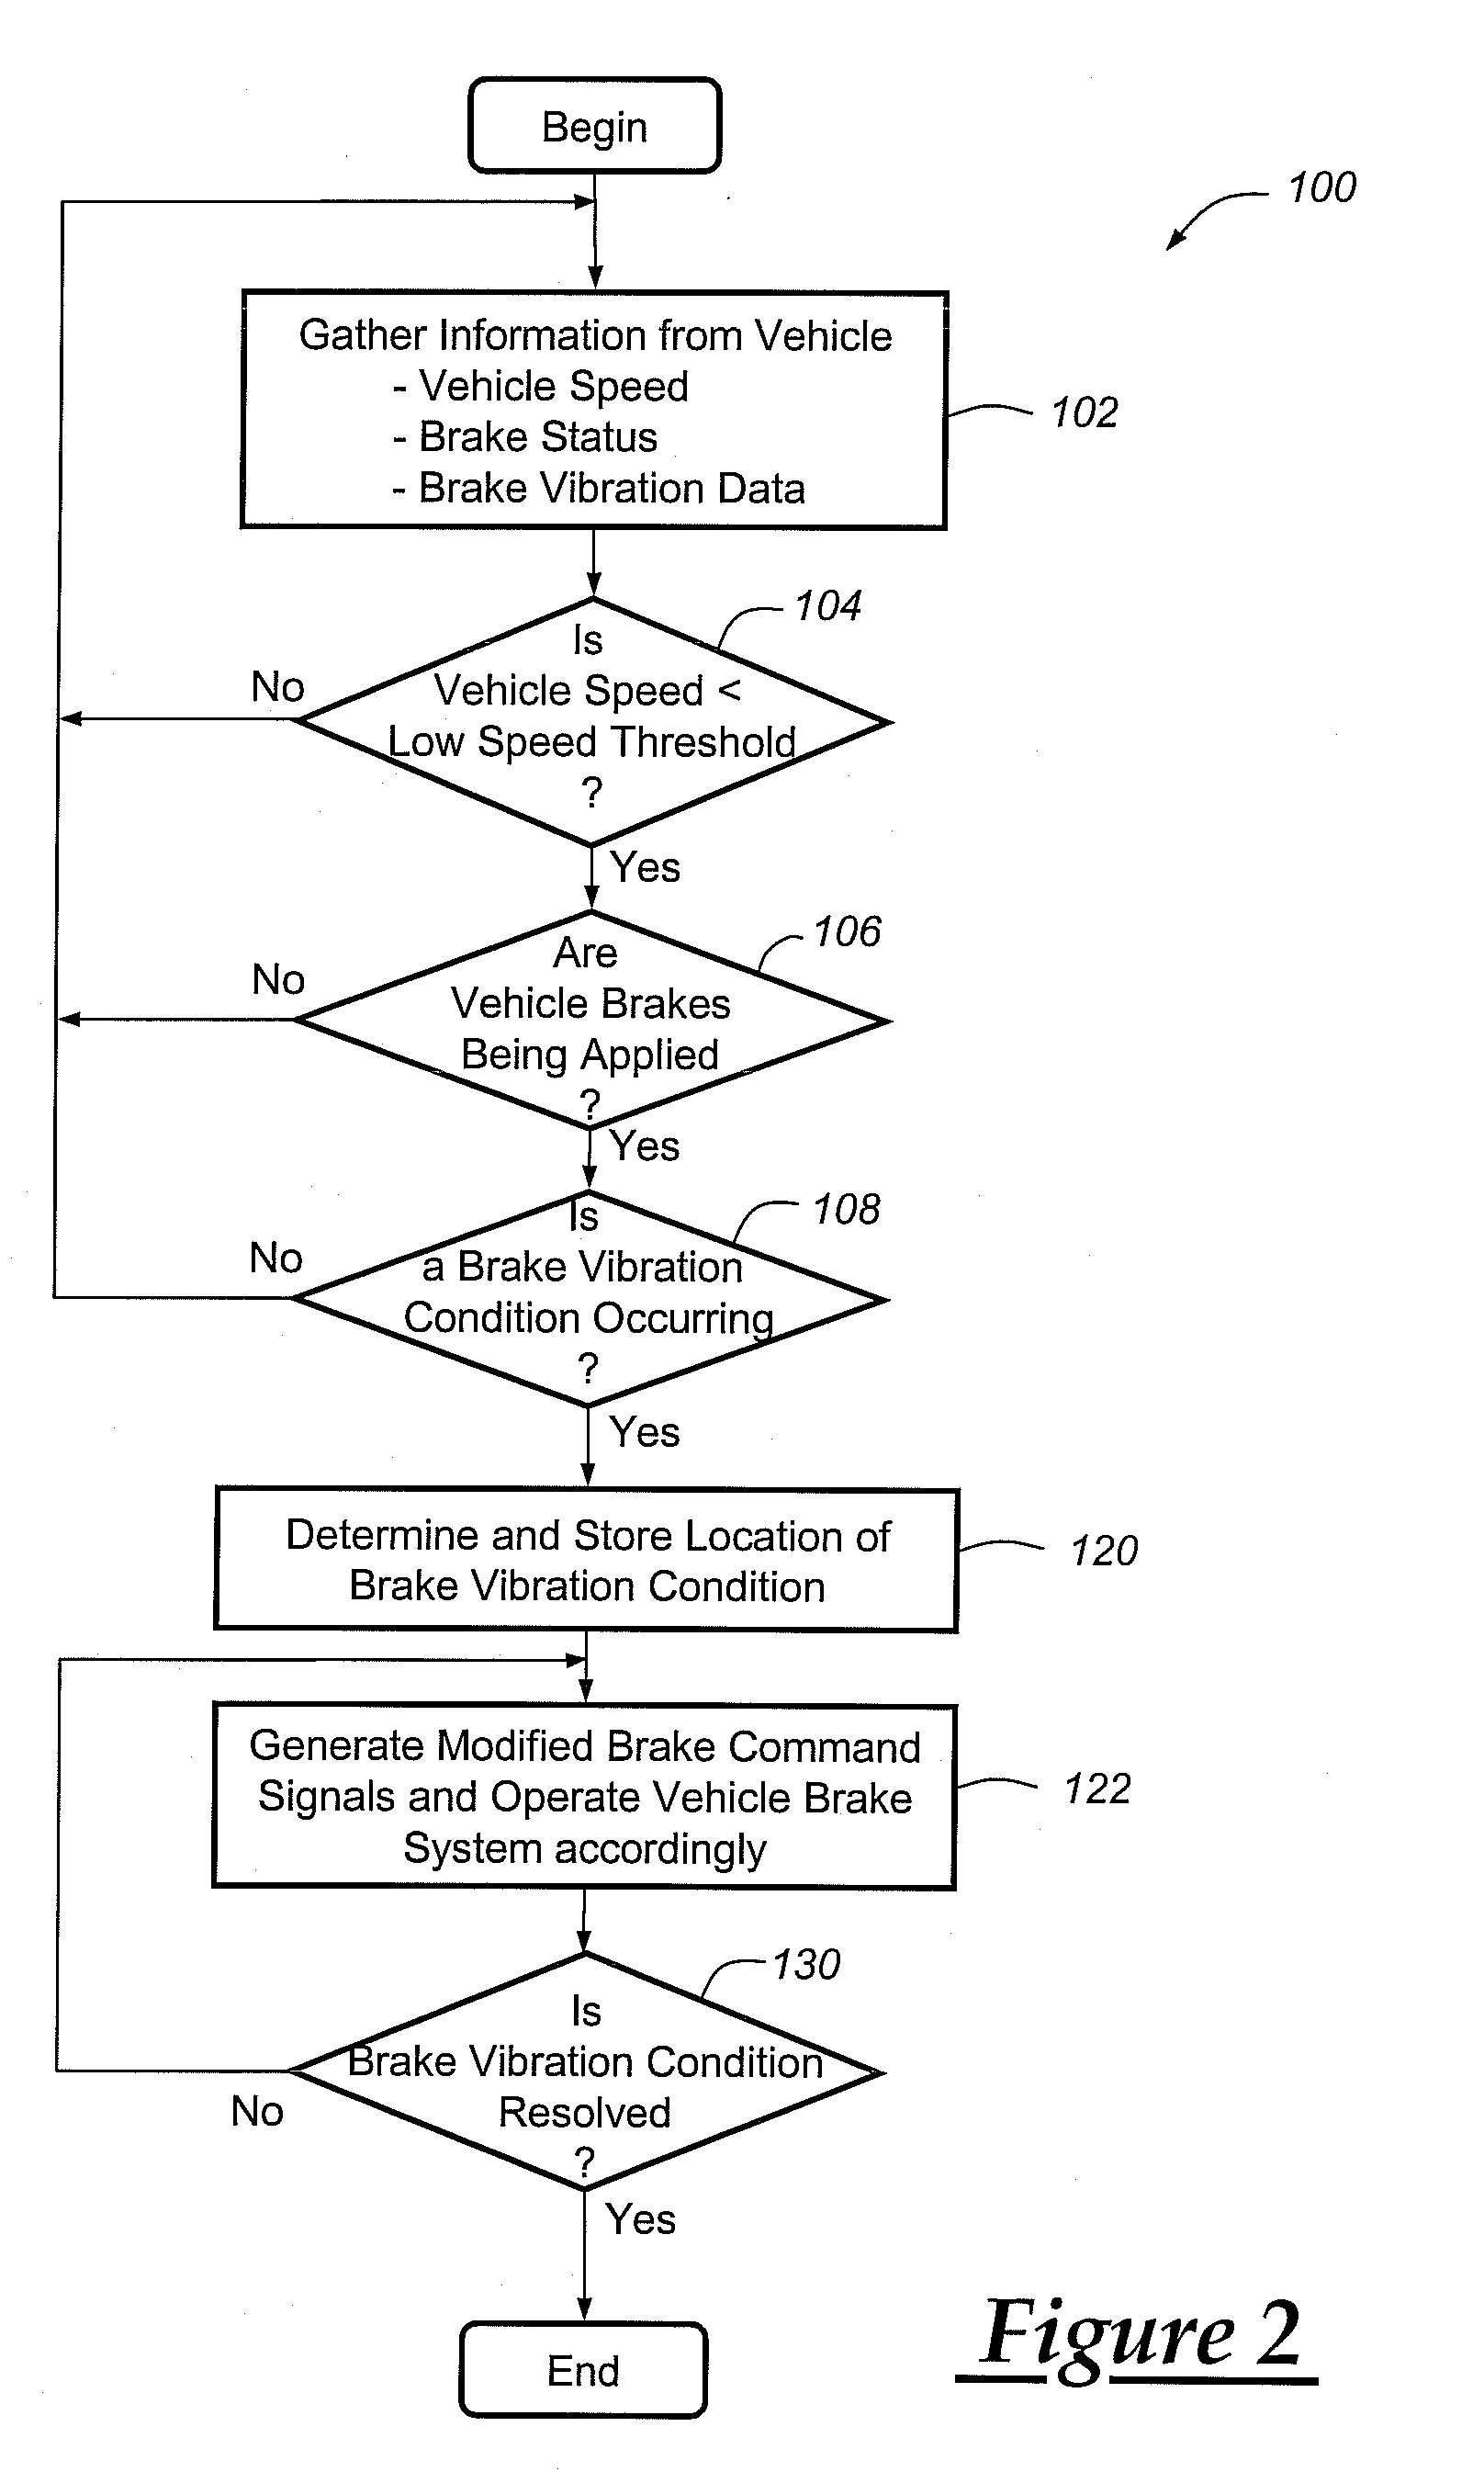 Method for operating a vehicle brake system